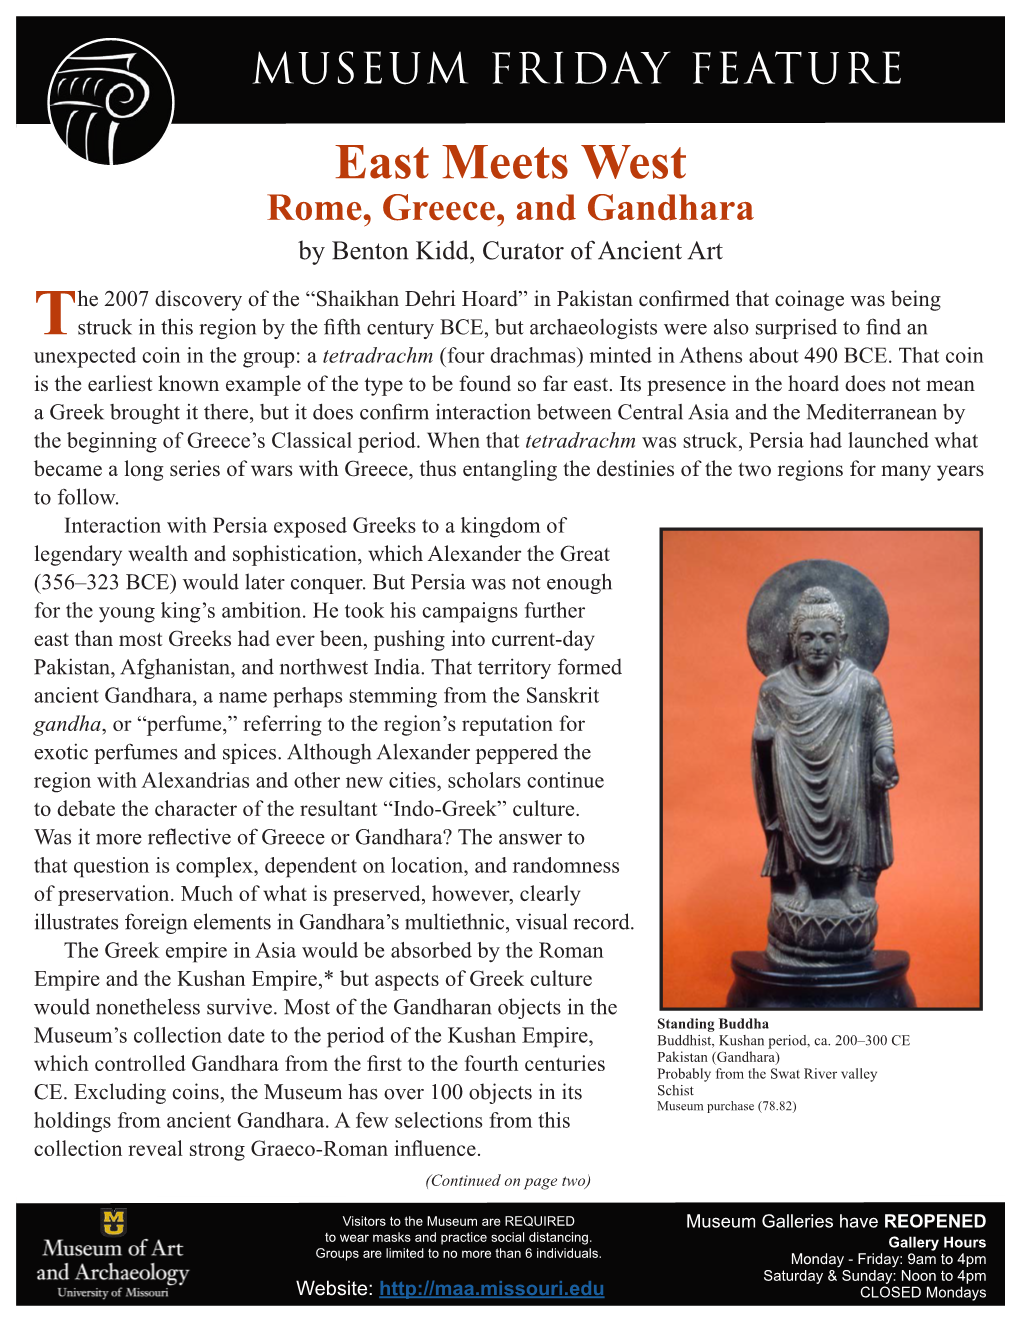 East Meets West: Rome, Greece, and Gandhara